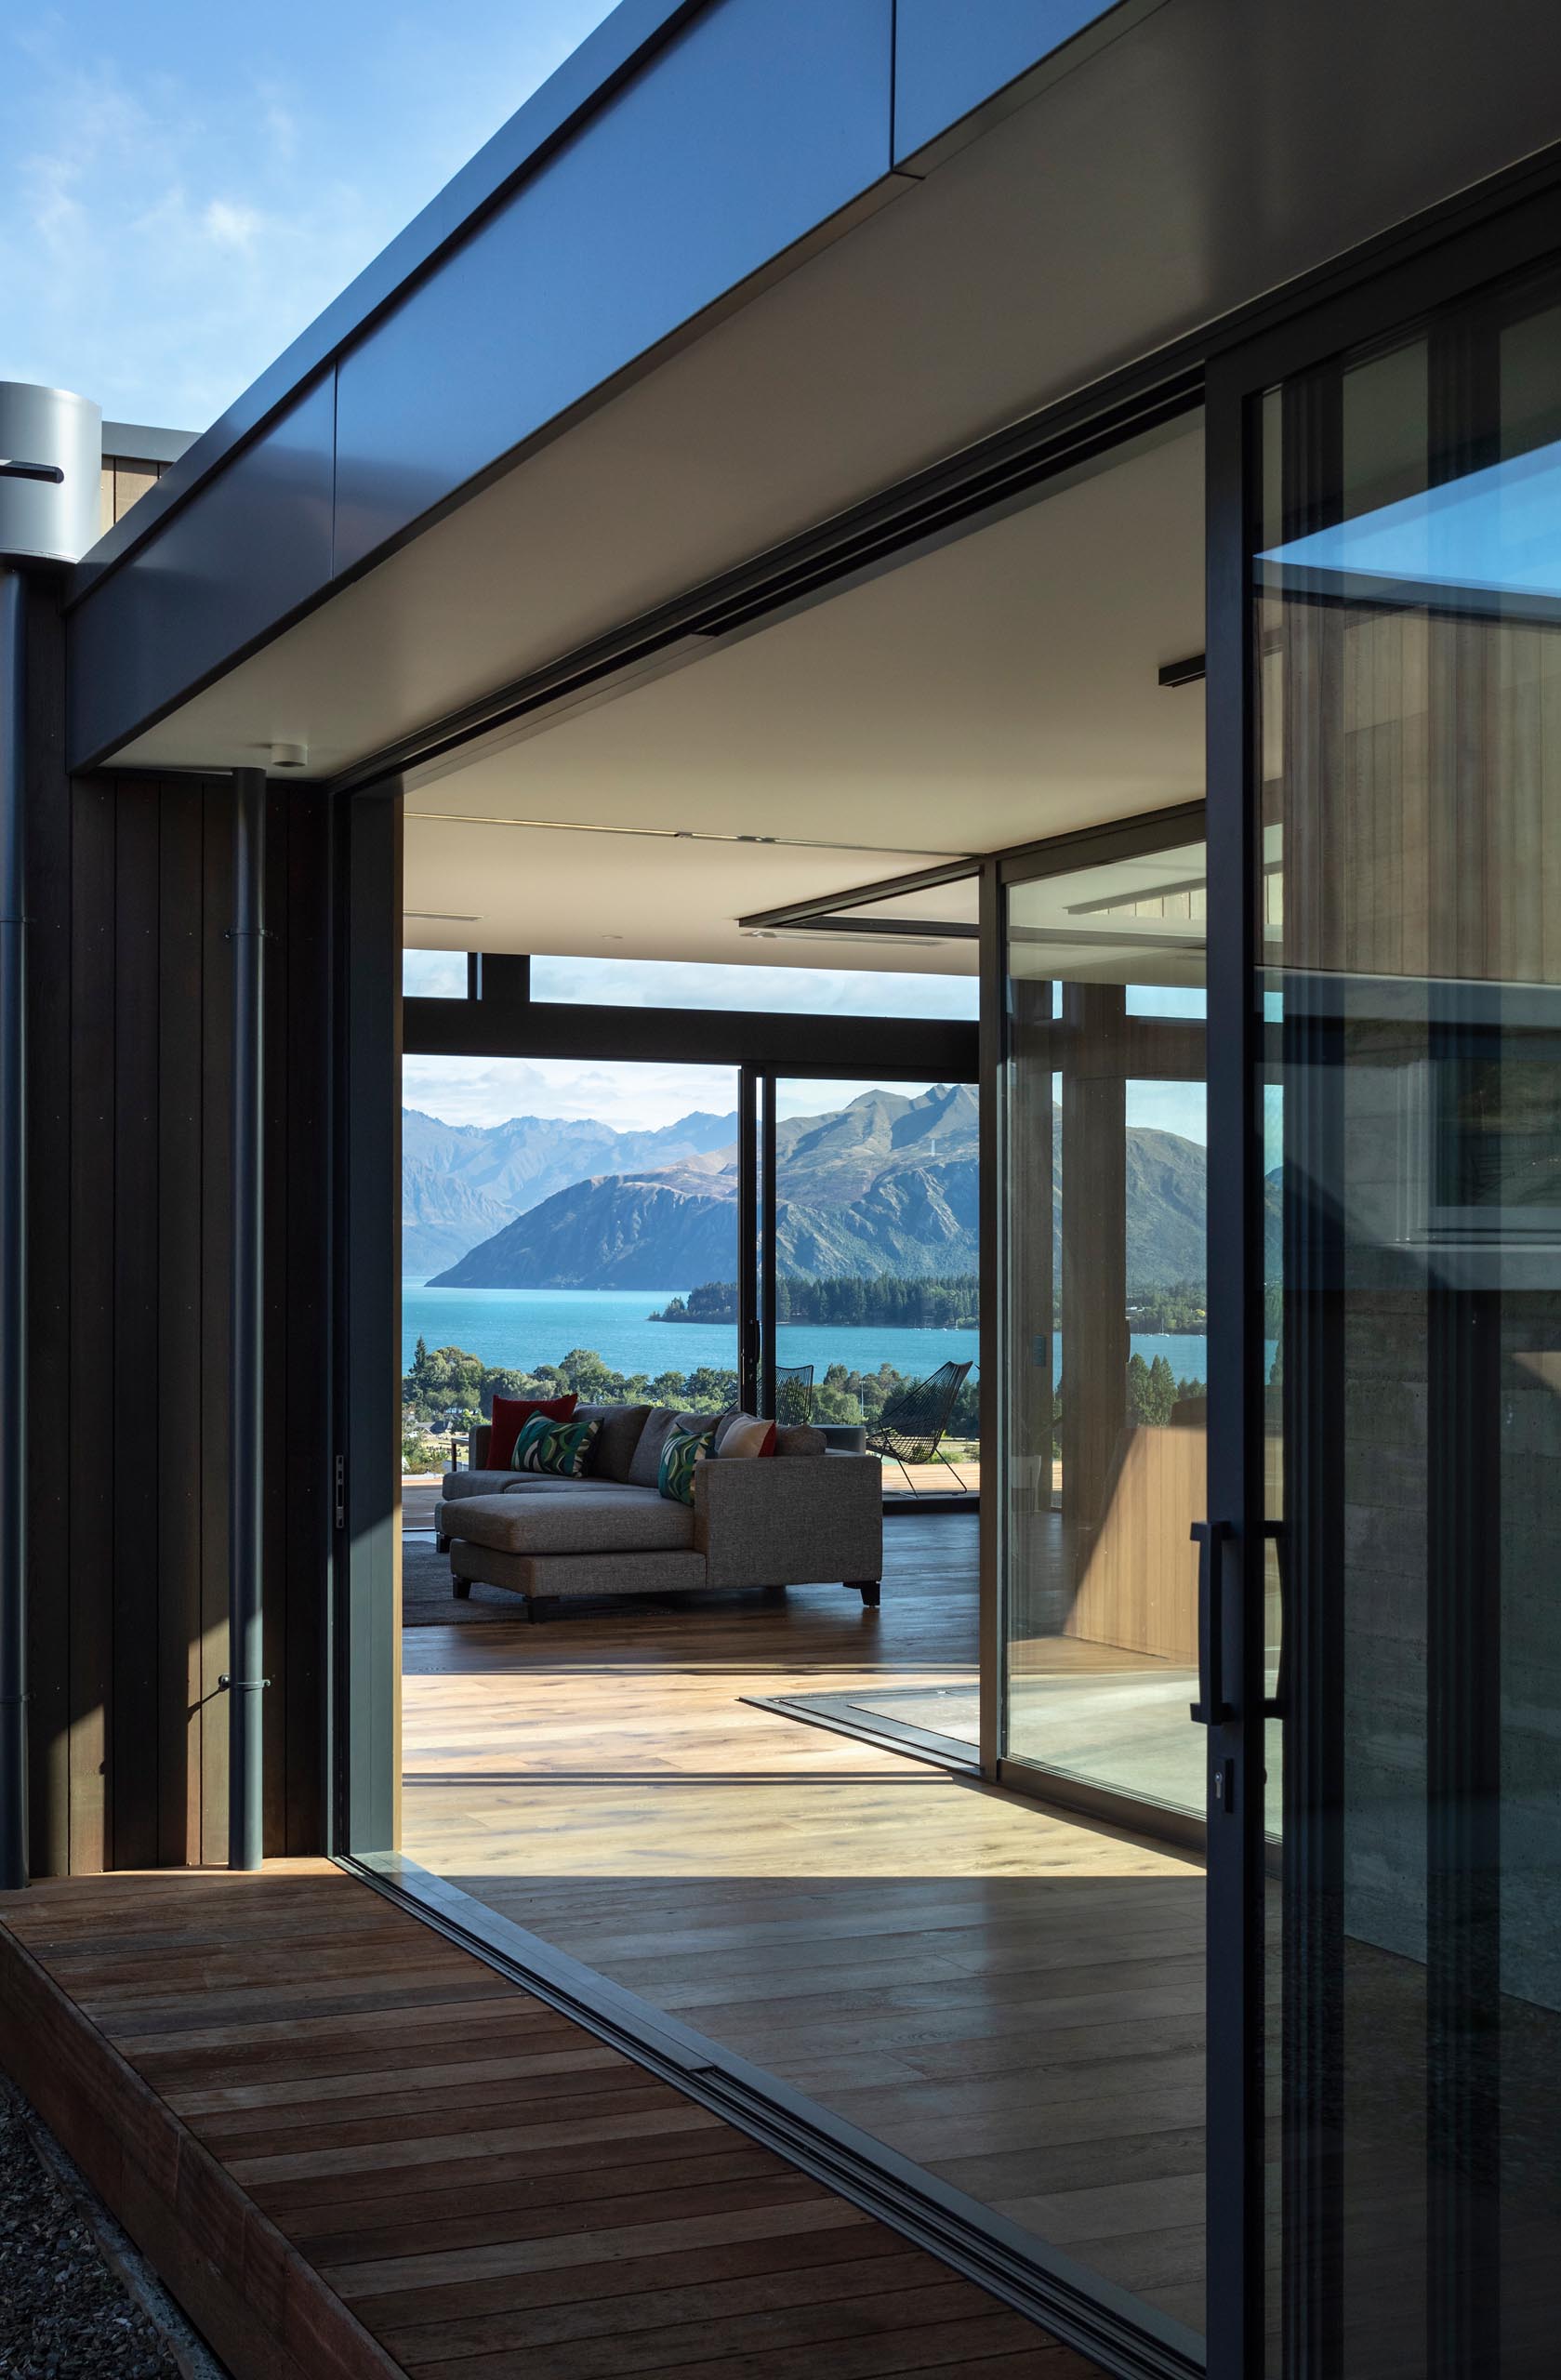 Large sliding glass doors open this home interior to the outdoors.